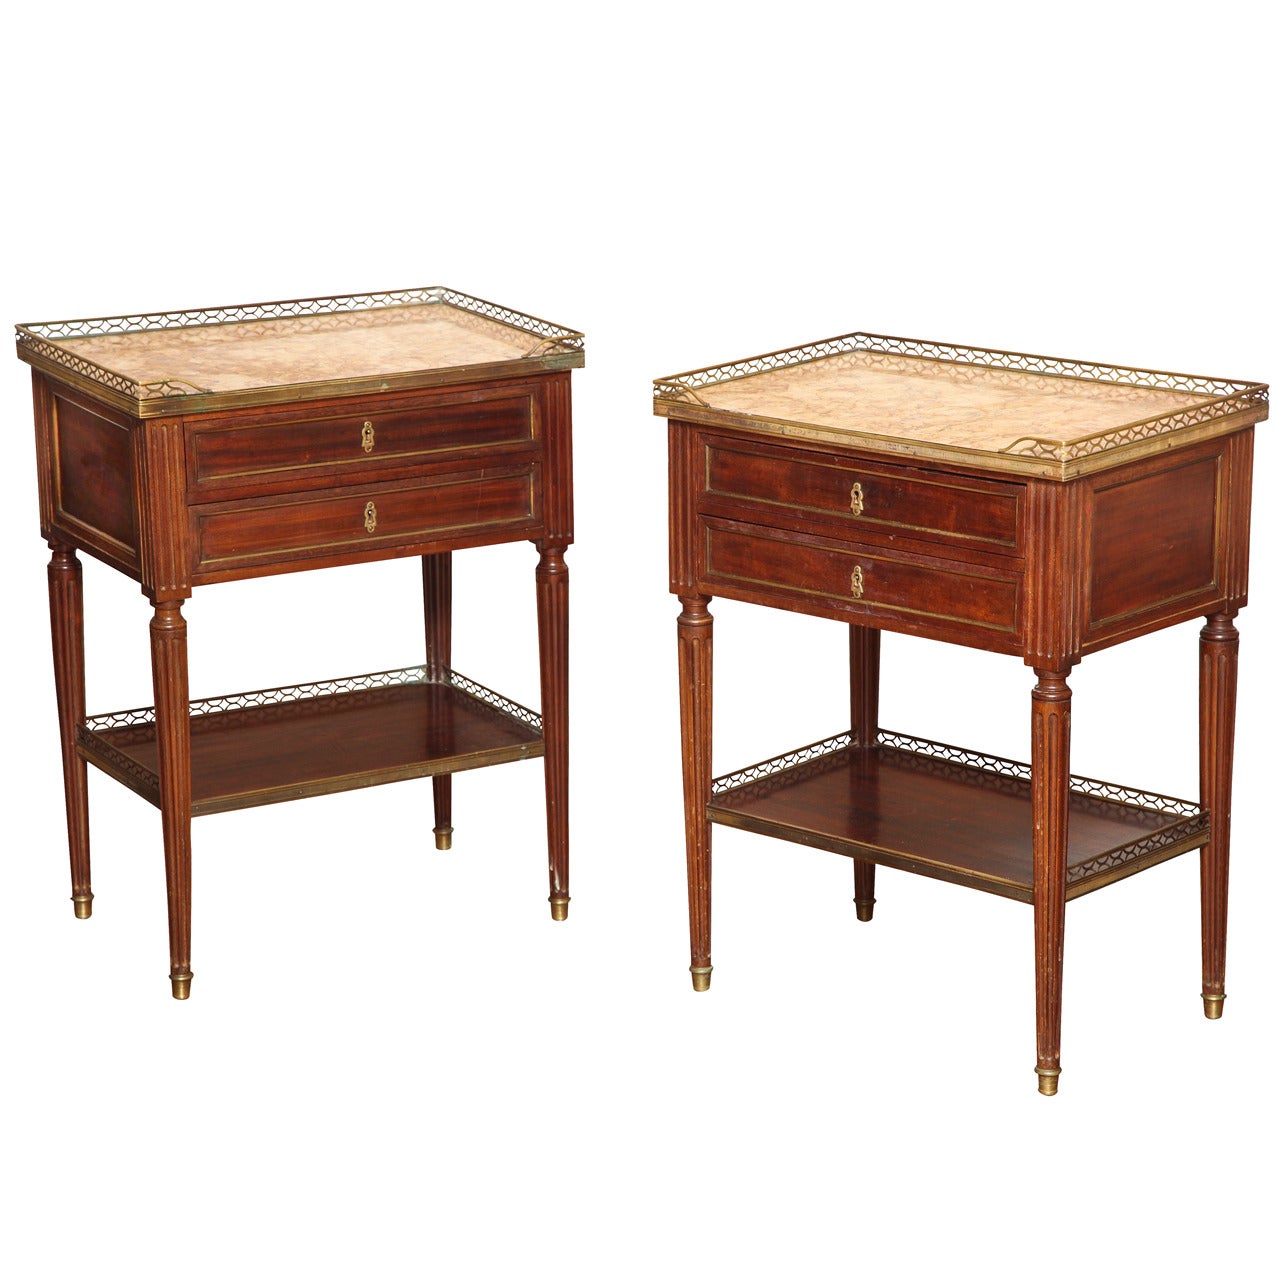 A Pair of French Louis XVI Style Two Drawer Bed Side Tables